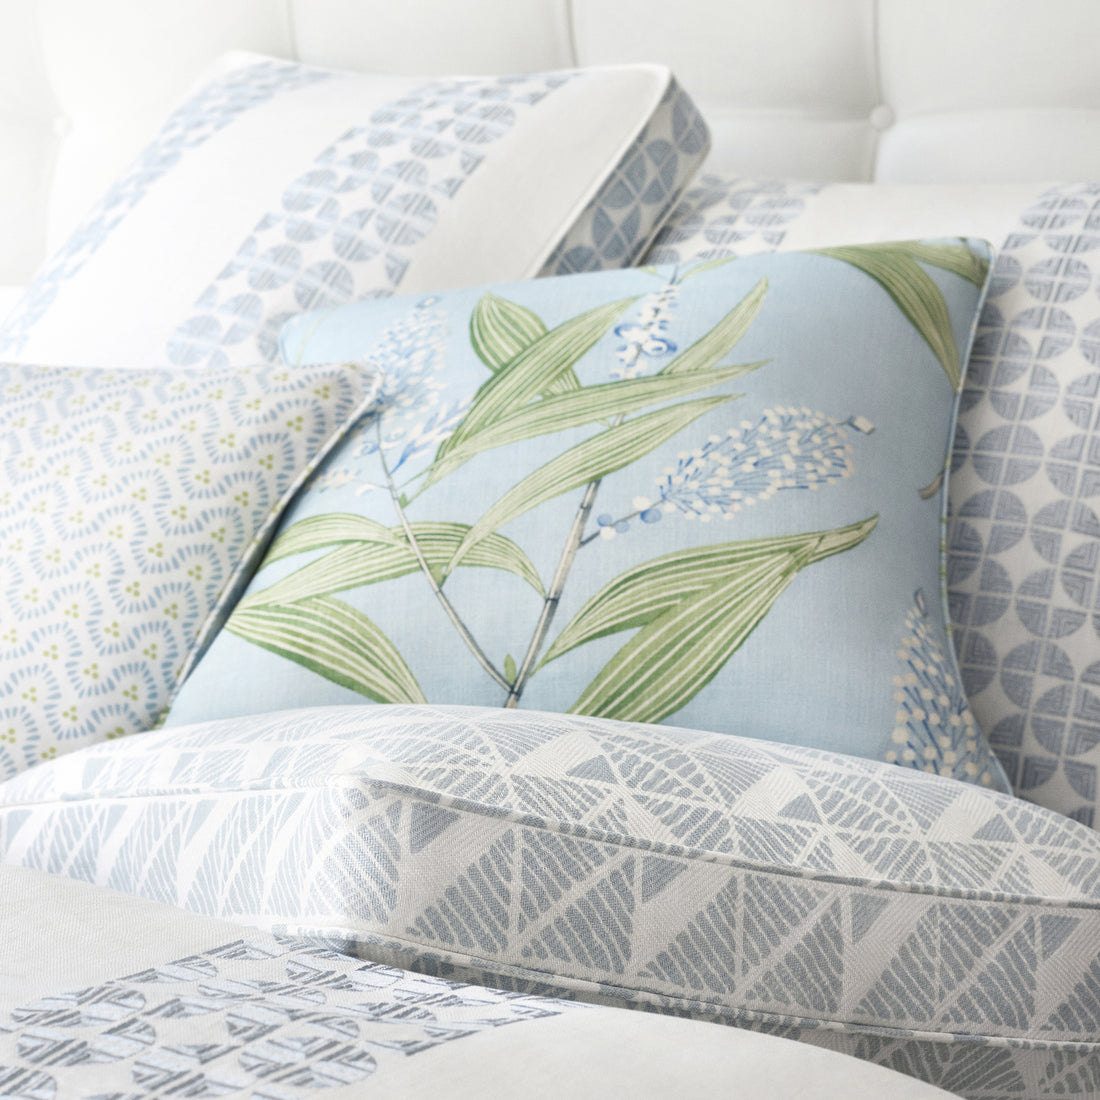 Pillow in Winter Bud printed fabric in Soft Blue - pattern number AF23133 - by Anna French in the Willow Tree collection